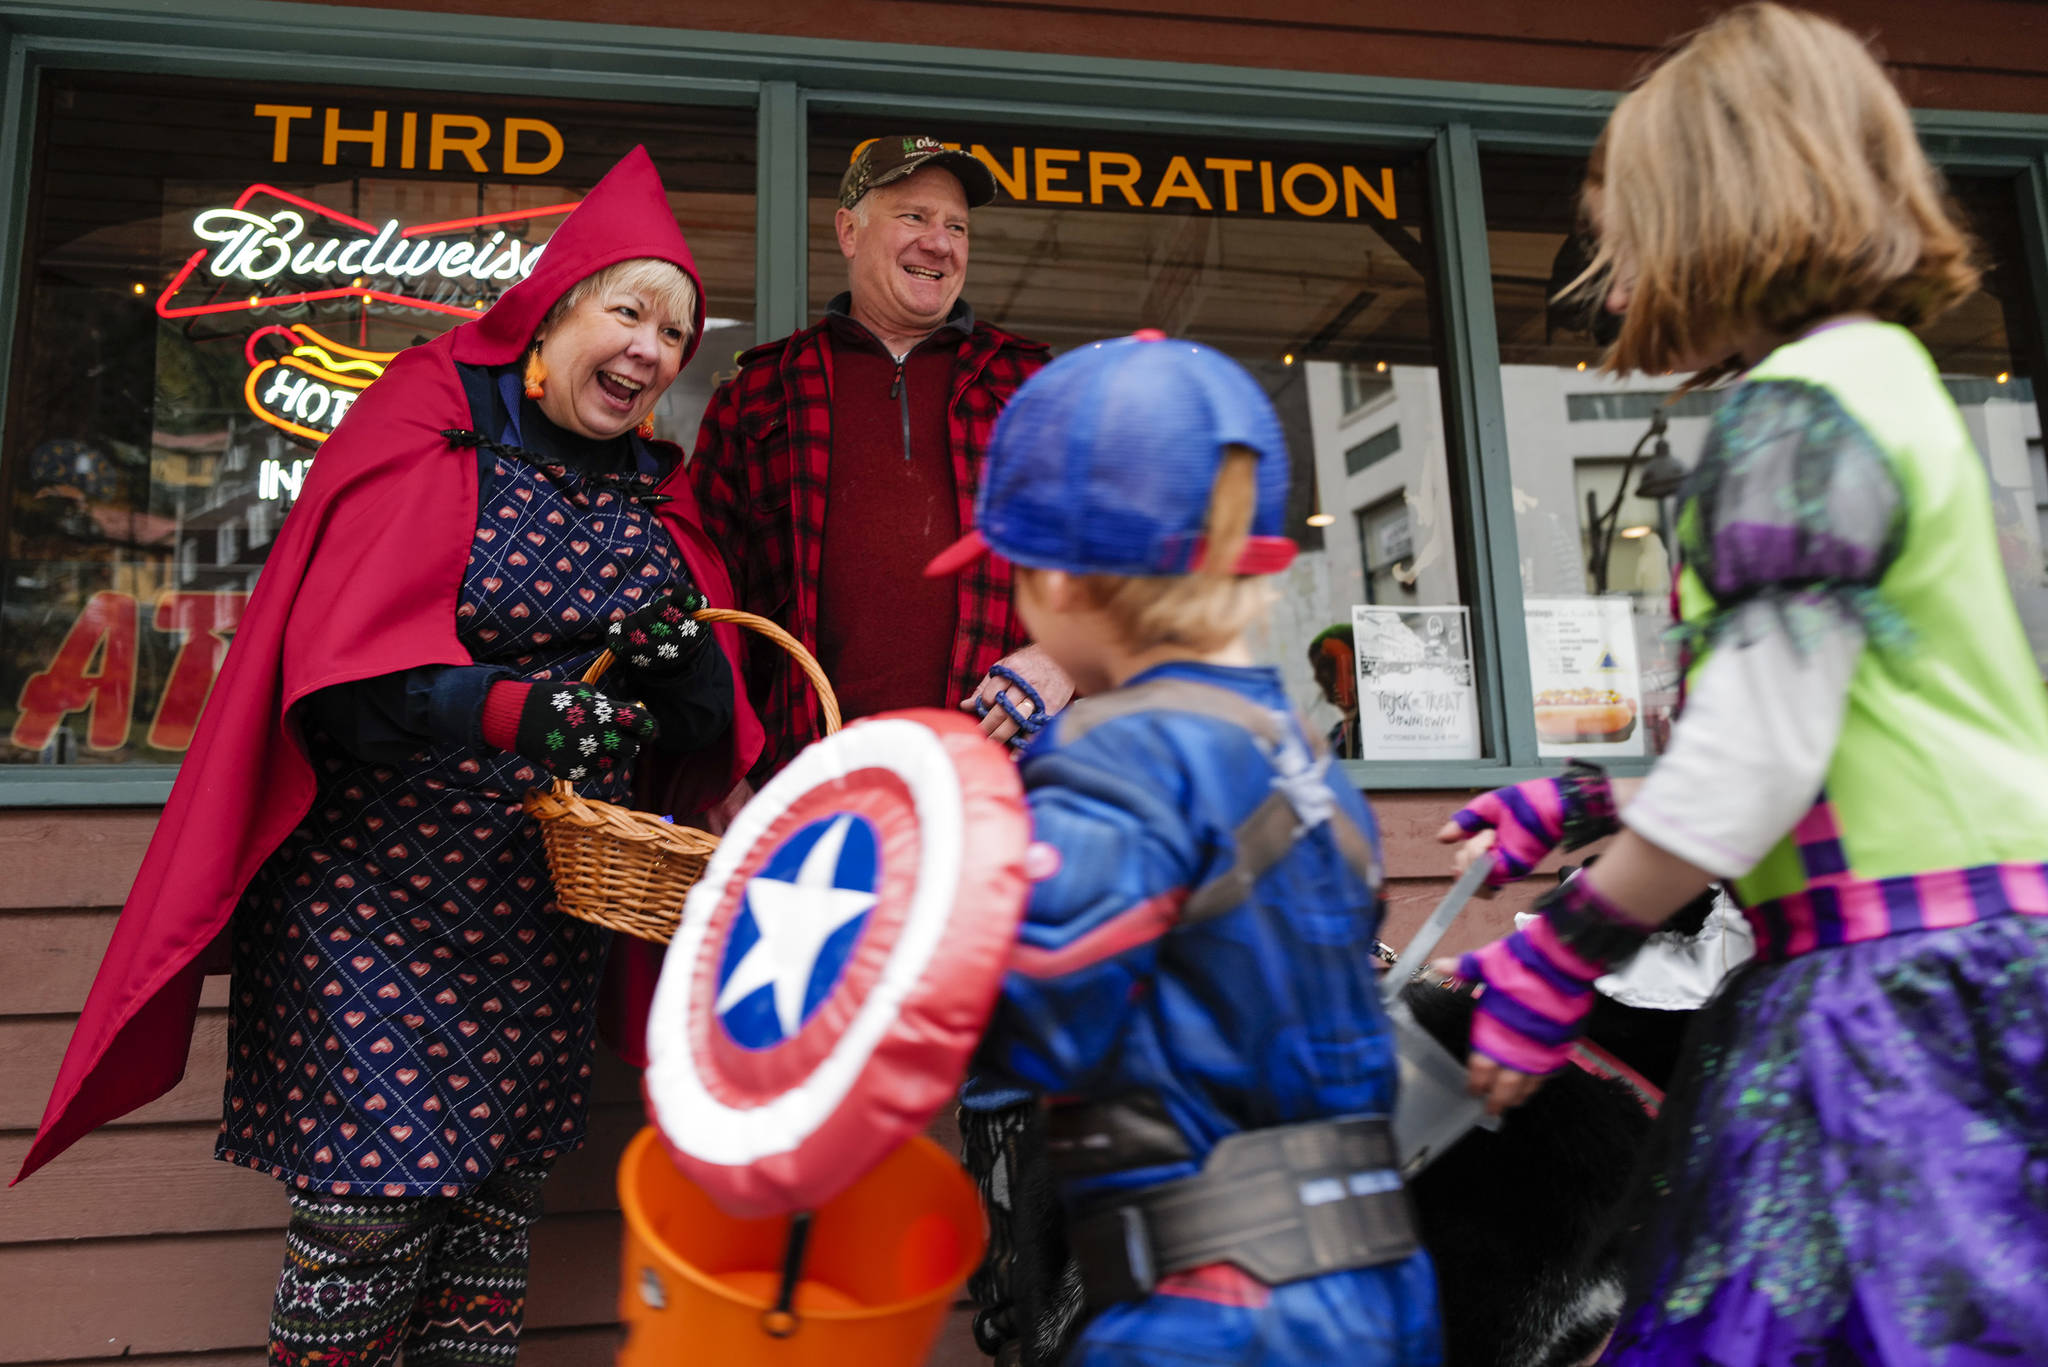 Jewels and Joe Butler greet children in front of the Triangle Bar during the Trick or Treat Downtown event on Thursday, Oct. 31, 2019. More than 70 business put out orange balloons to participate in the event aimed at young children. (Michael Penn | Juneau Empire)